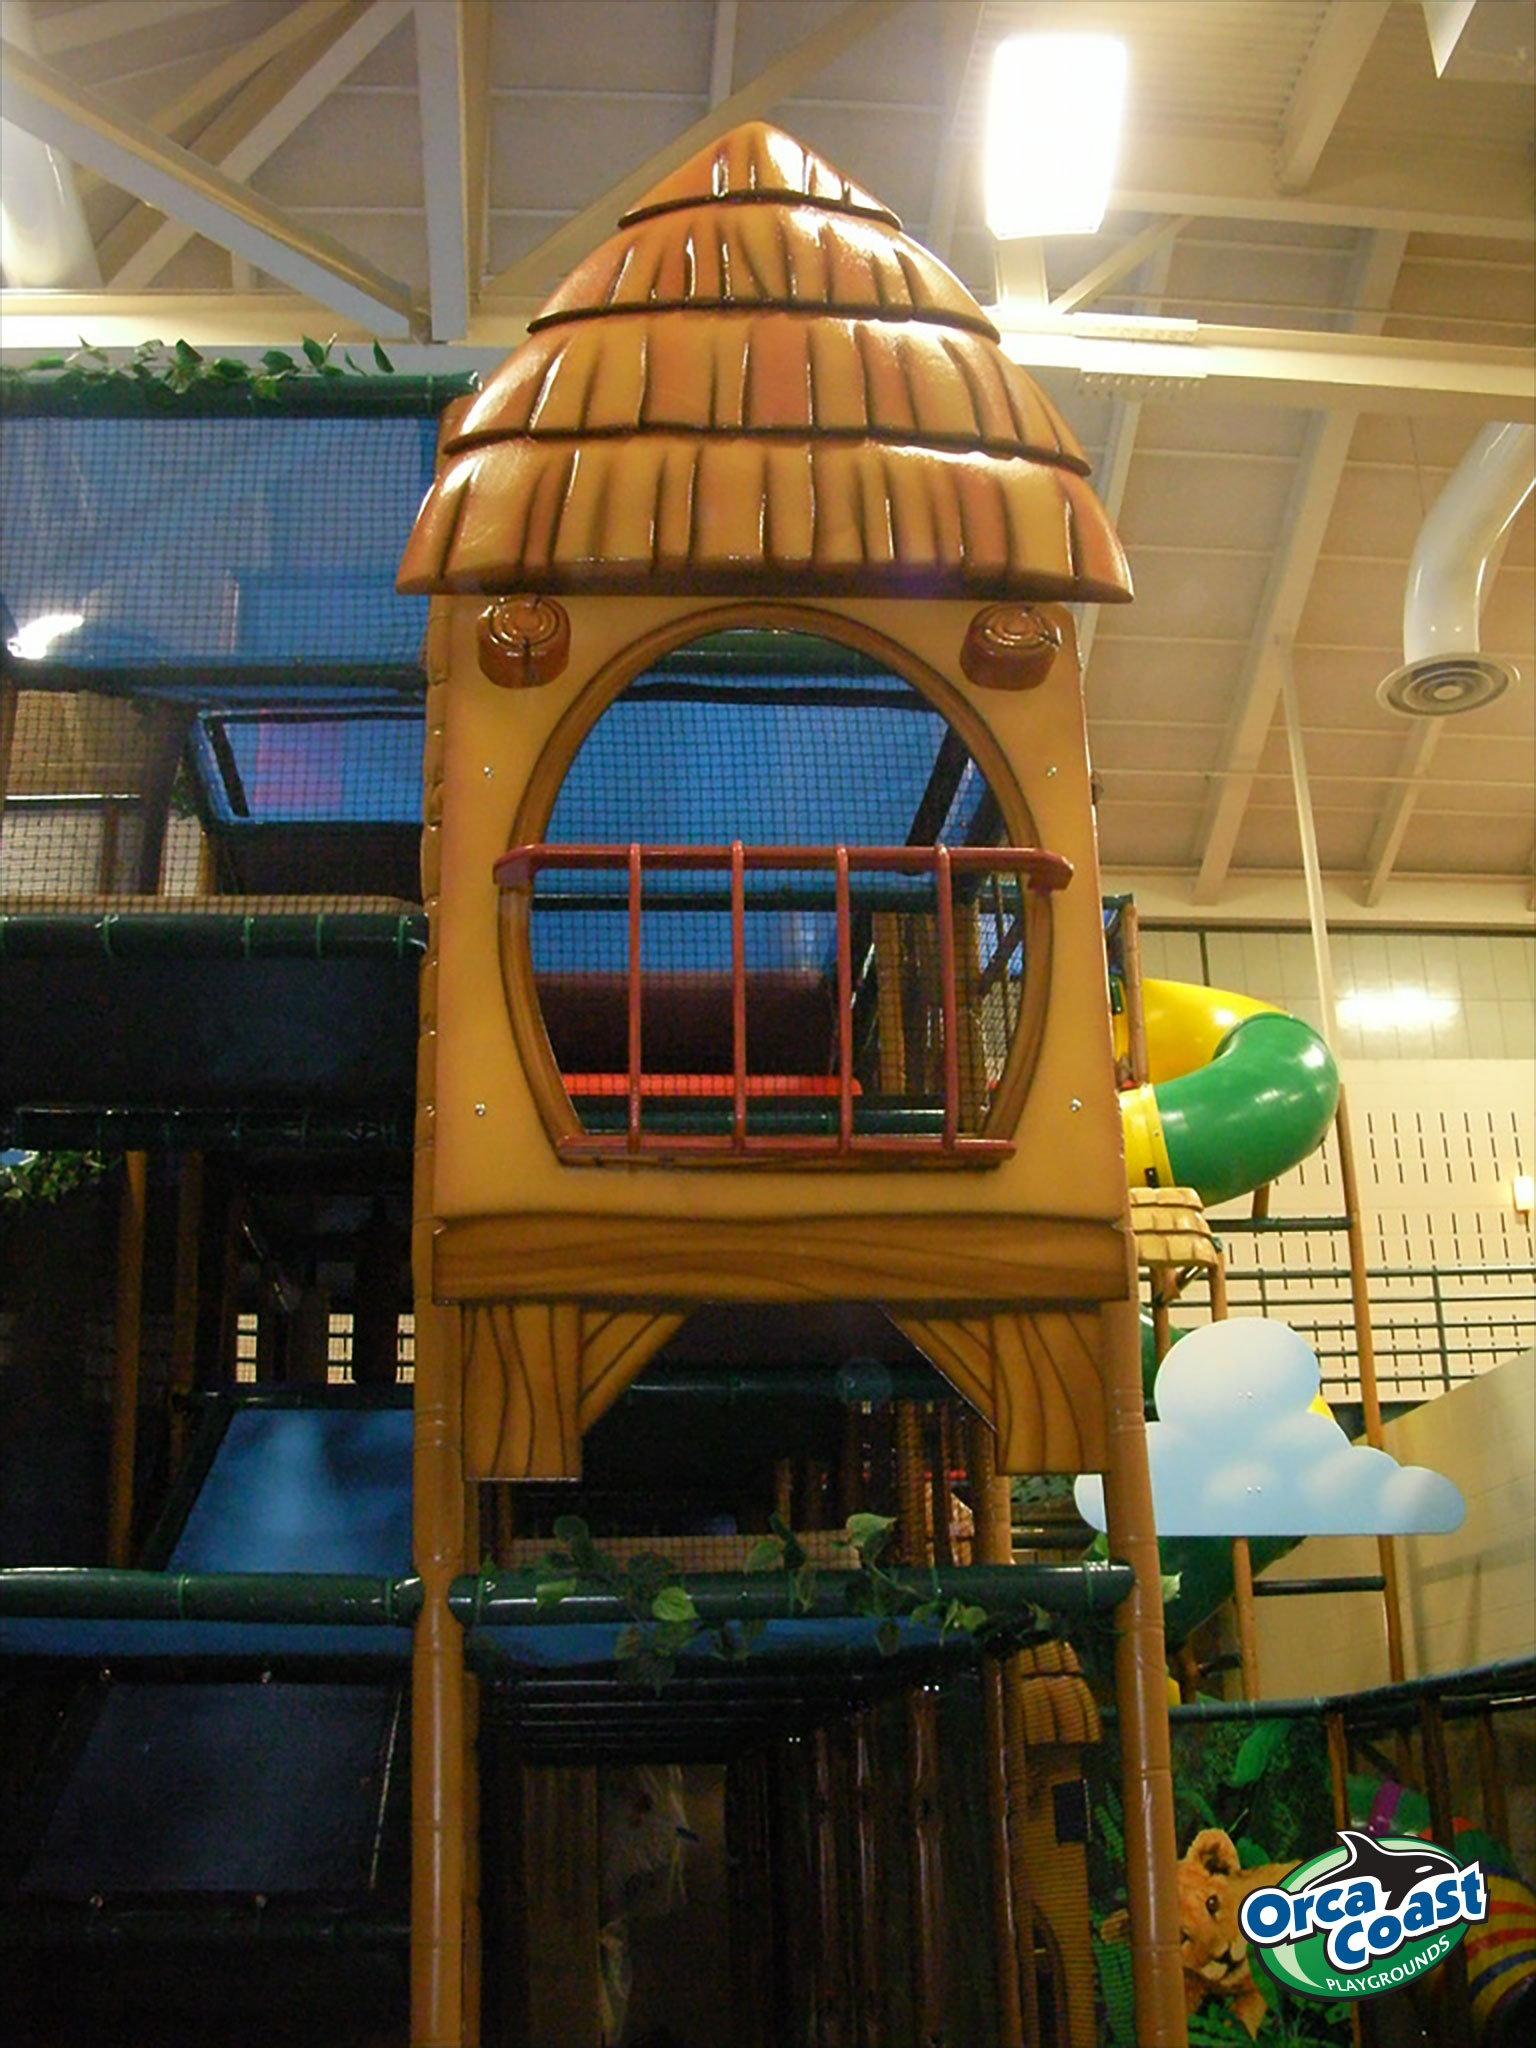 Shoreview Community Center in Shoreview, MN: Safari Adventures Unleashed